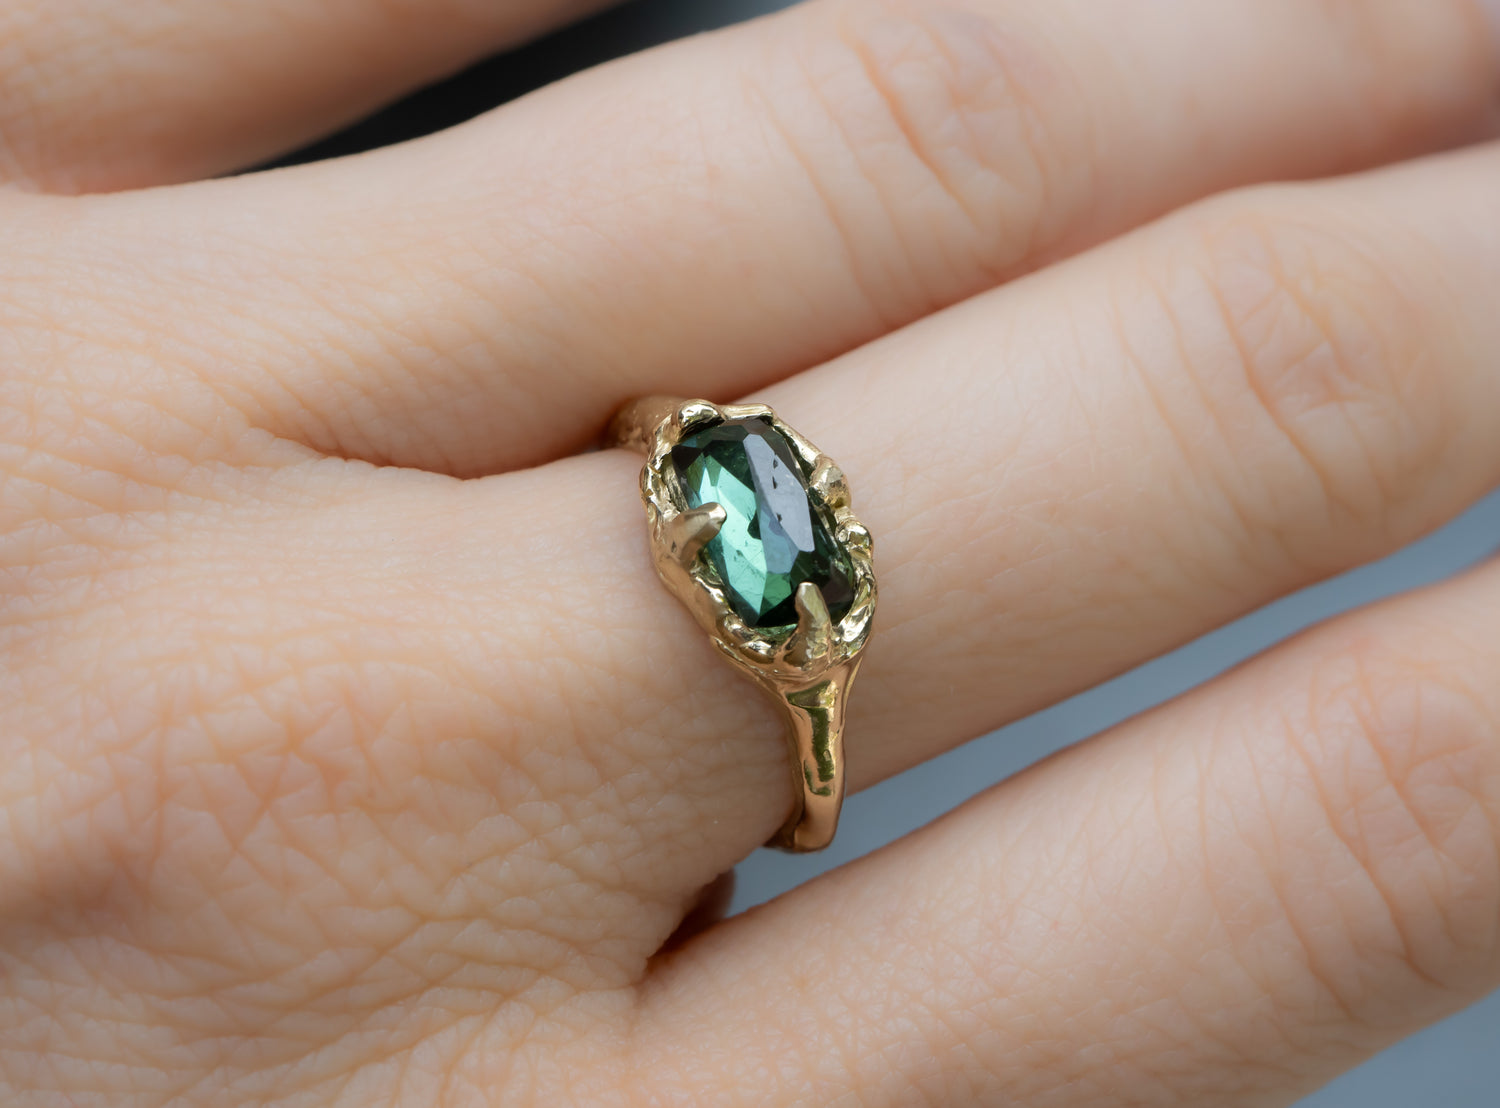 Mermaid Green Tourmaline Ring in 14k Gold Setting - mossNstone